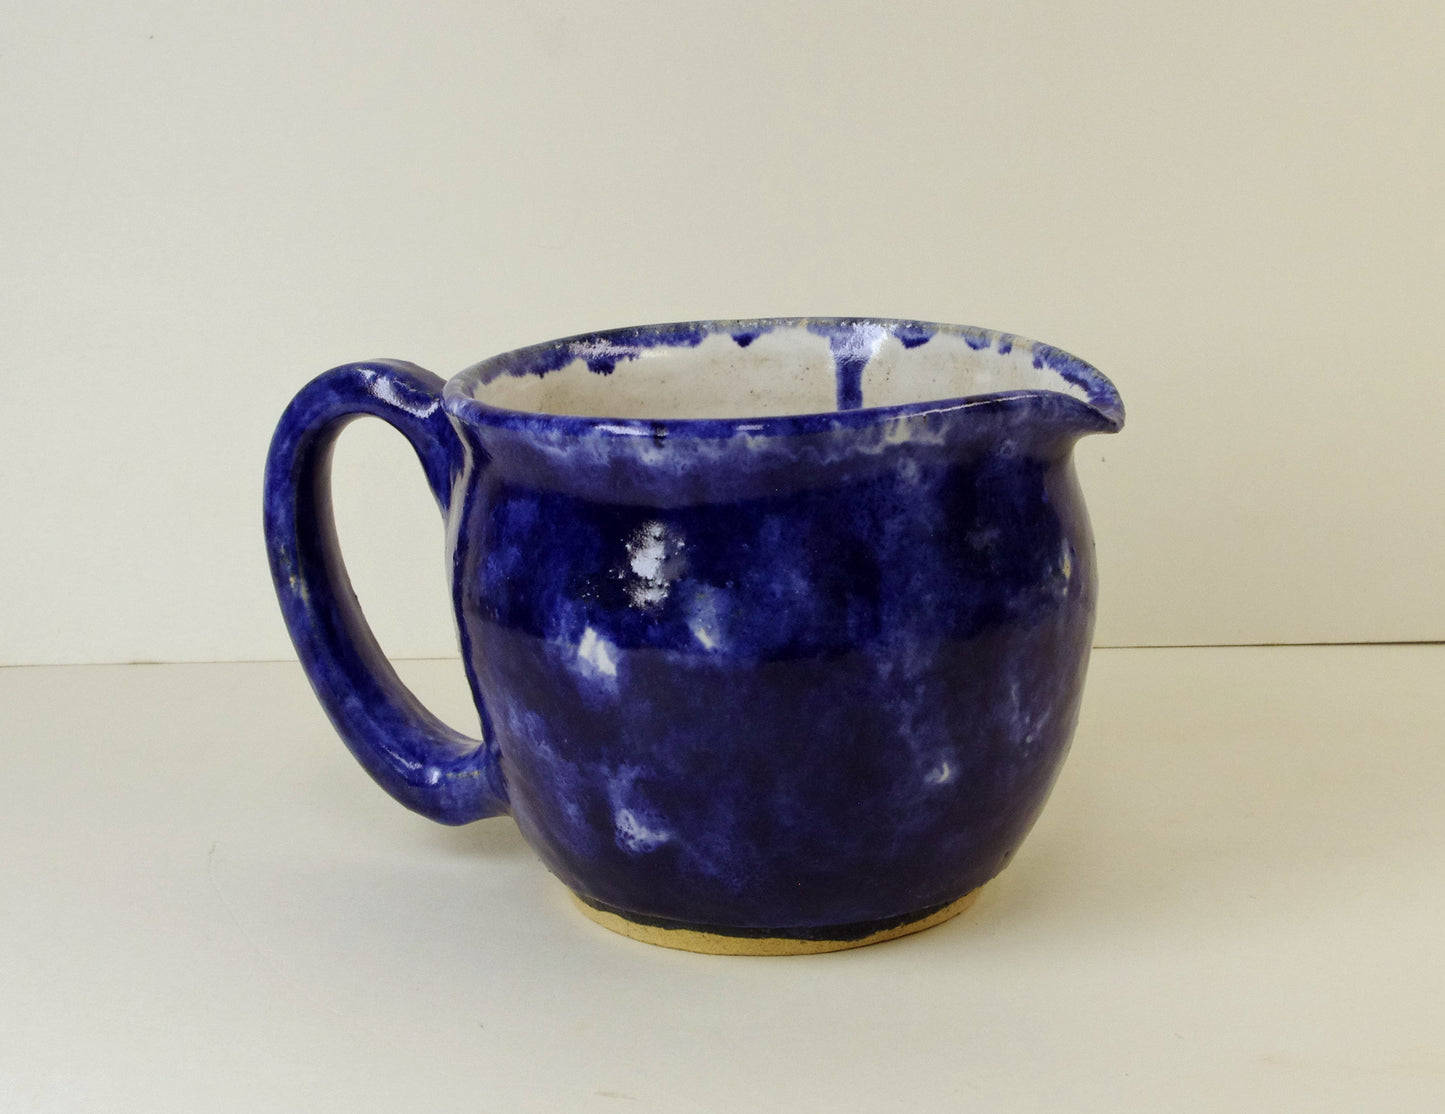 2108, Hand Thrown Stoneware Pitcher, Blues, 4 1/4 x 4 1/2 Inches